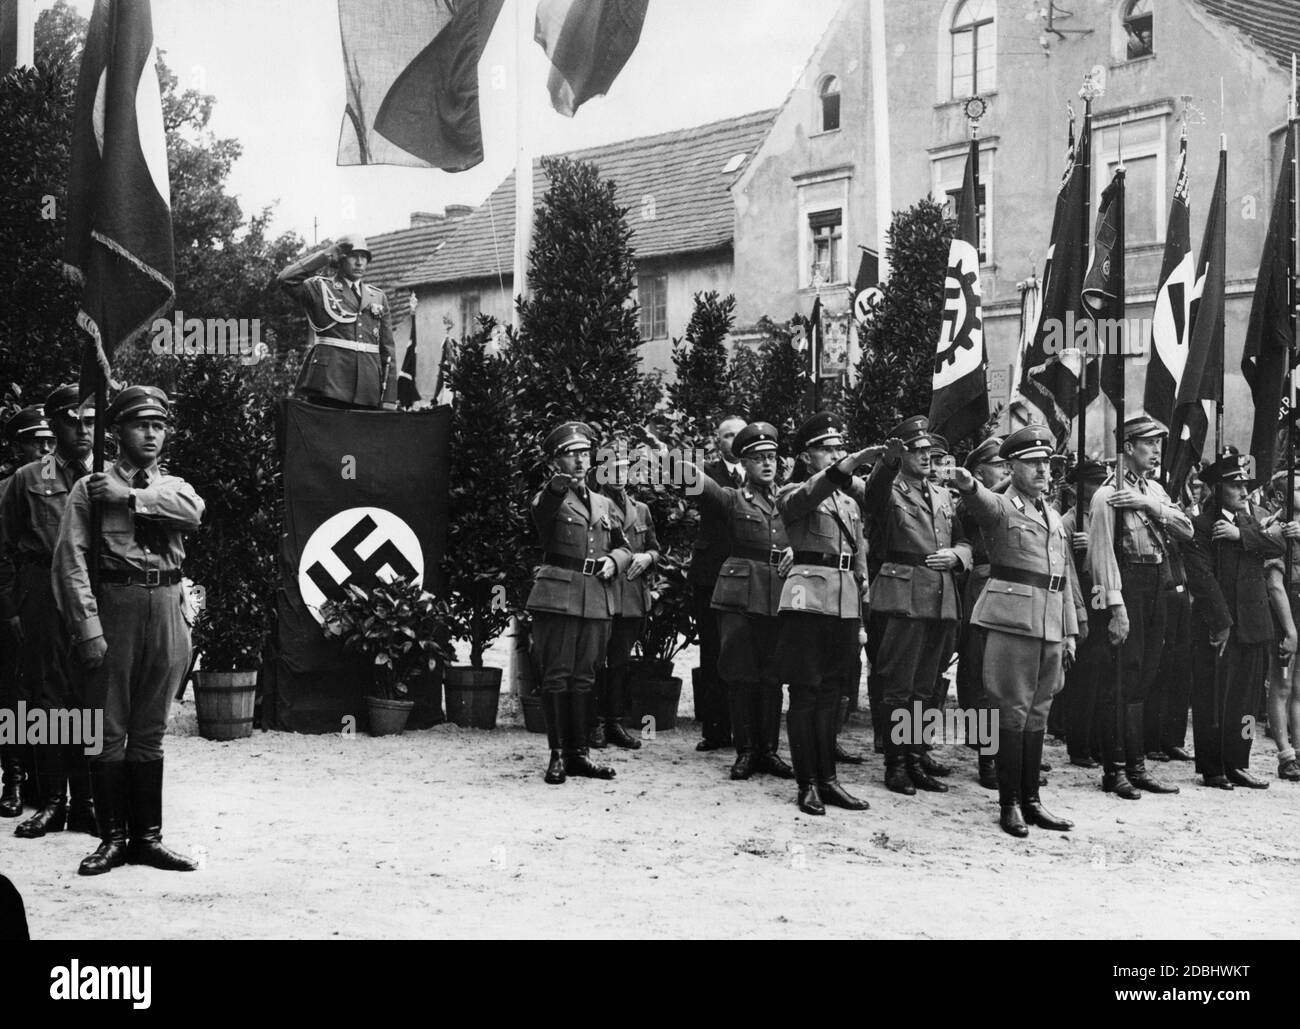 'The Air War School Wildpark Werder is ceremonially received in its new location Werder. At the lectern, the commander of the Air War School, Lieutenant Major Floerke, and in the foreground on the right, the District President Fromm Potsdam. The ''Deutschlandlied'' is being sung.' Stock Photo